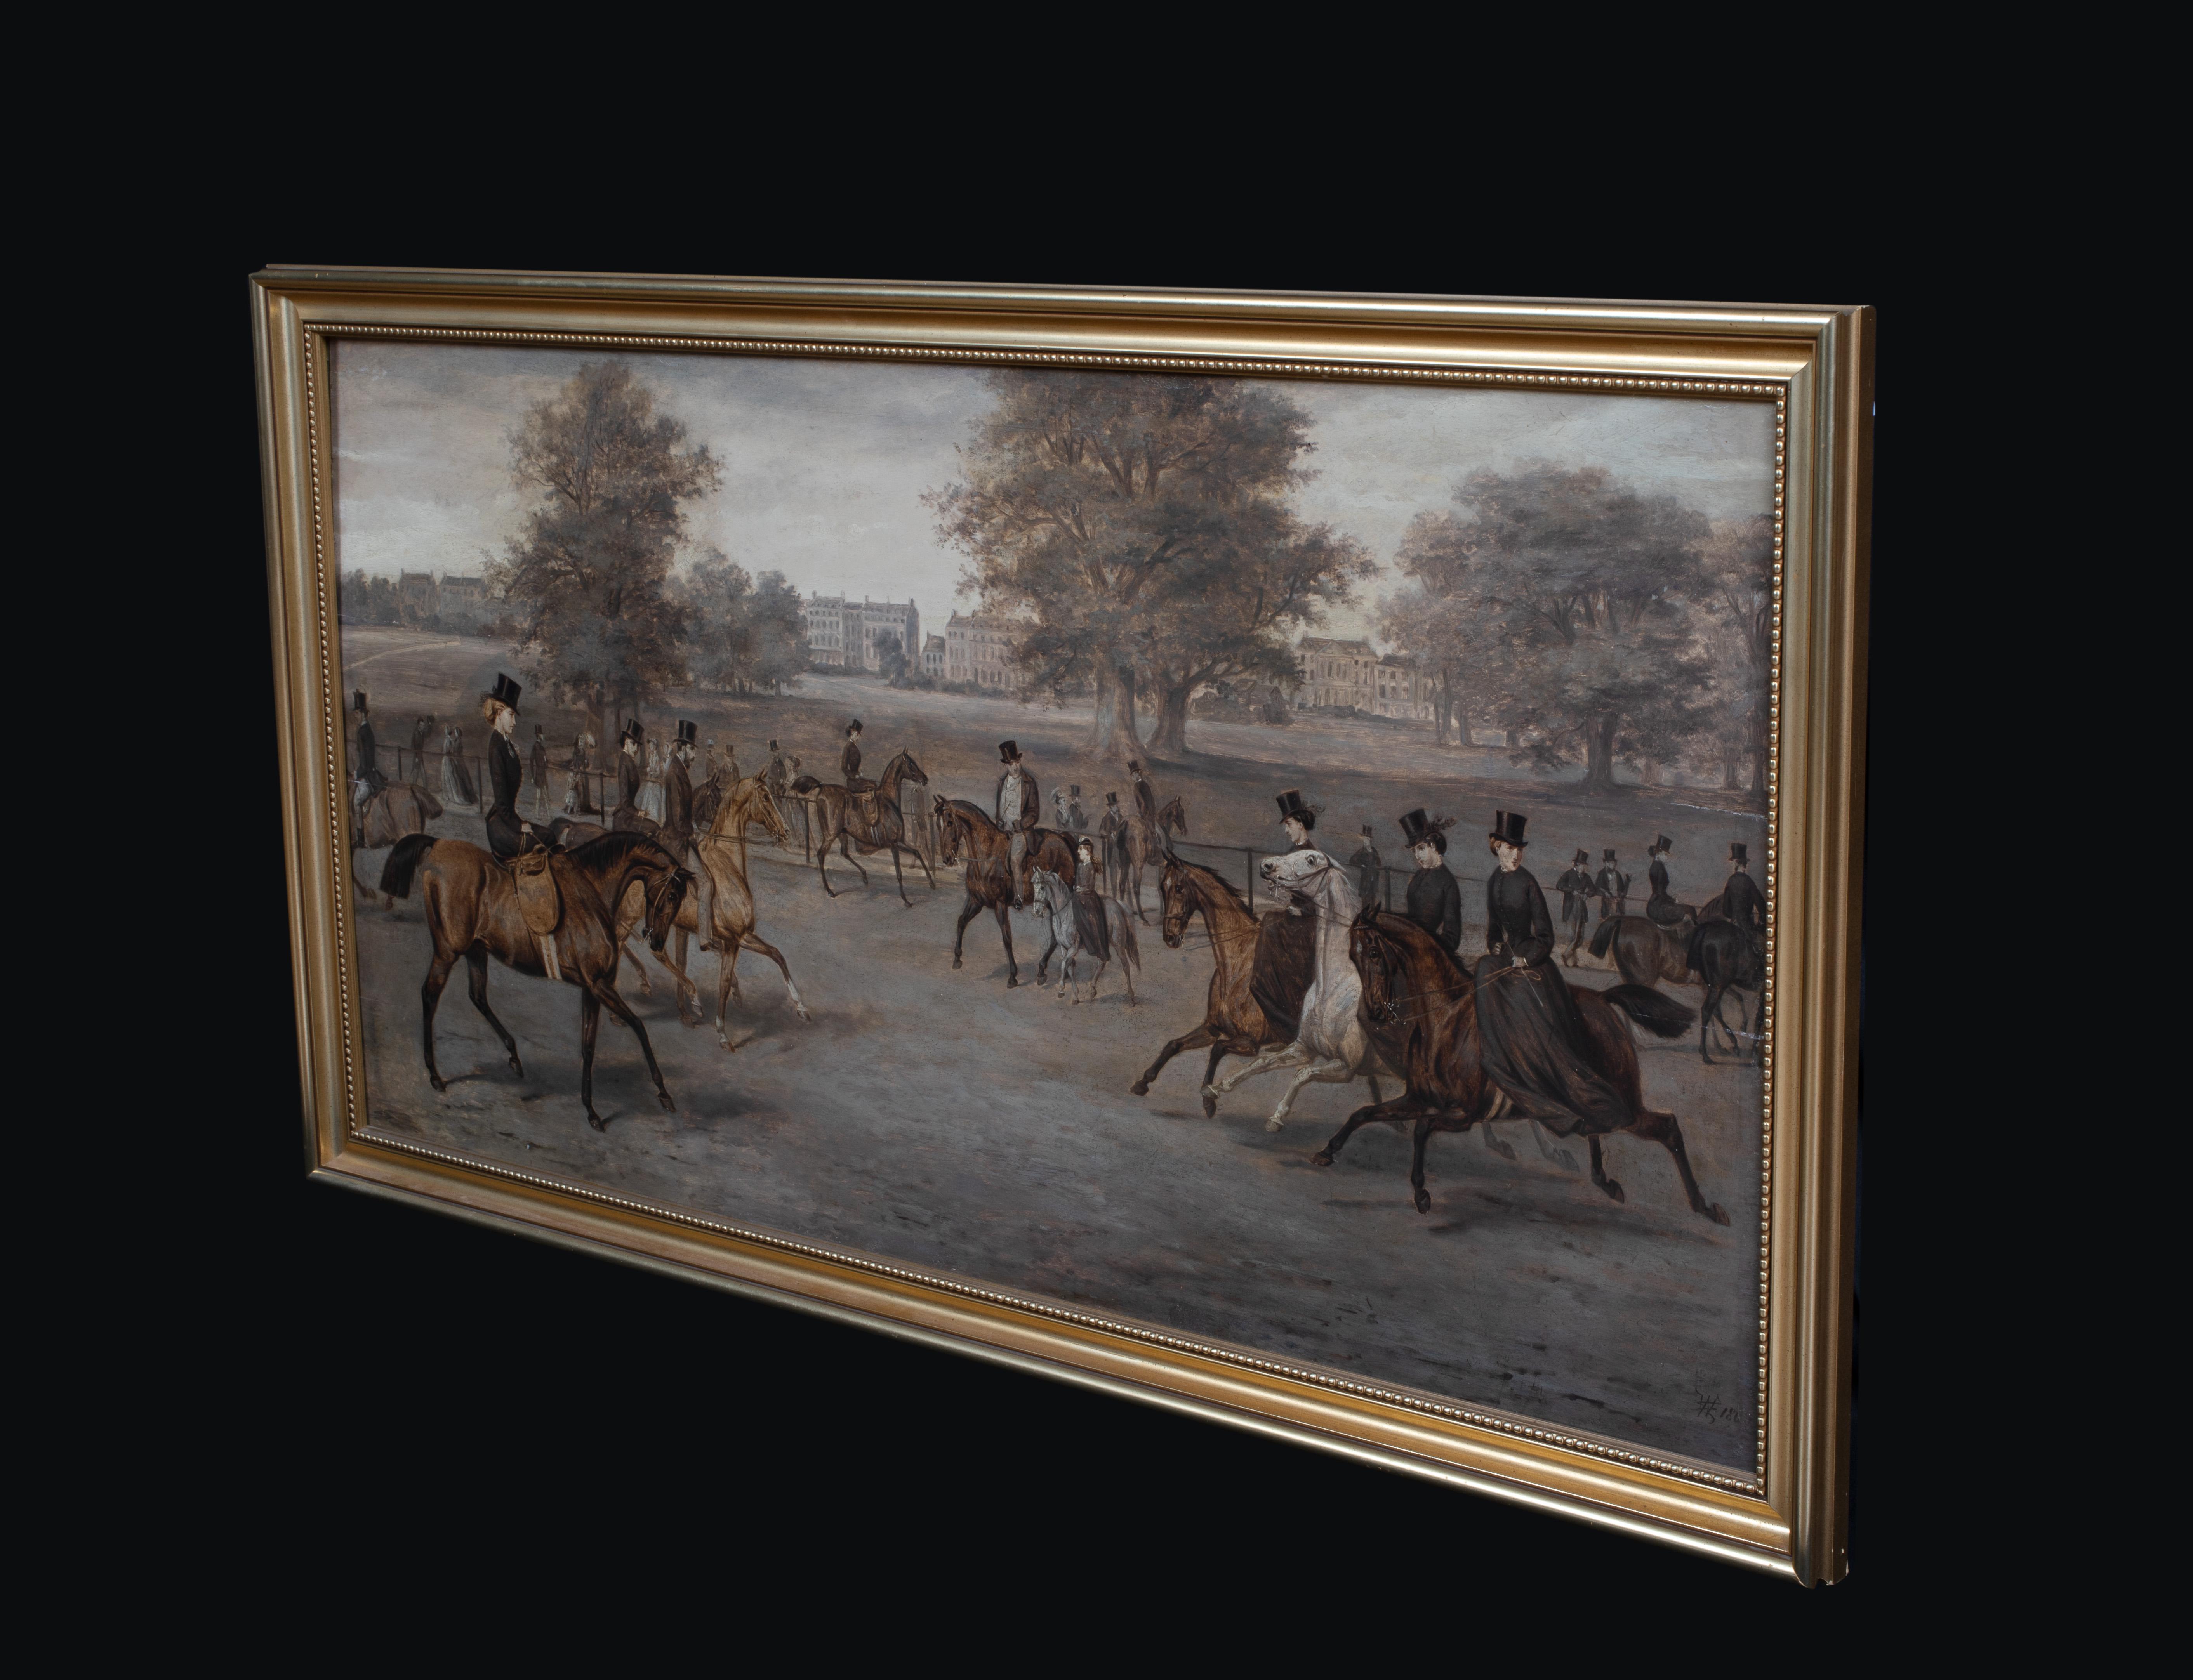 Horse Riding At Rotten Row, Hyde Park, London, 19th Century  - Black Landscape Painting by William Henry Wheelwright